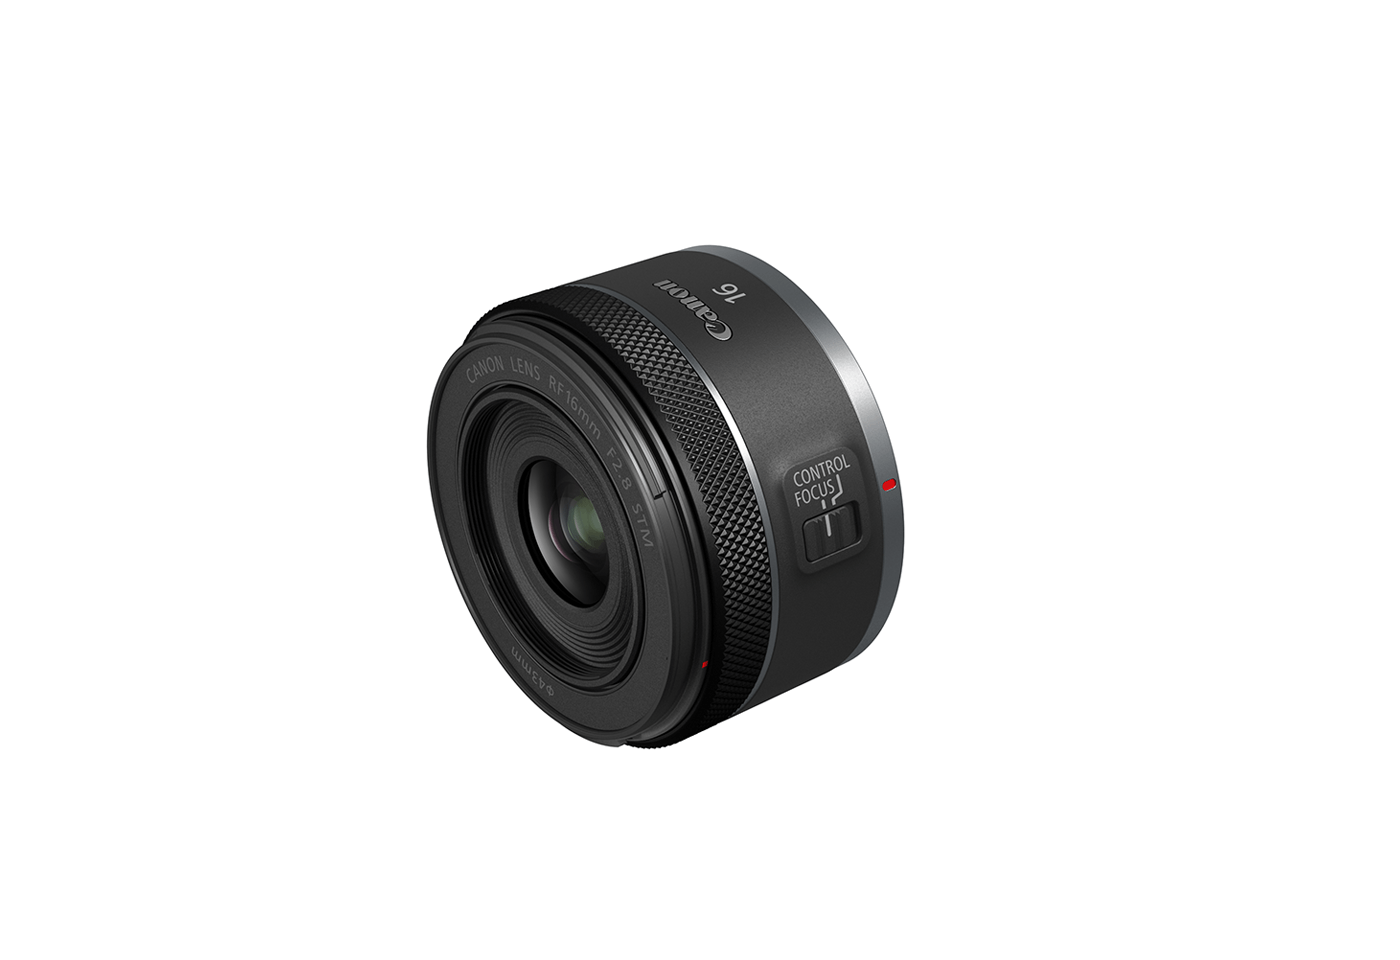 Front profile image of the RF 16mm F2.8 STM wide angle lens